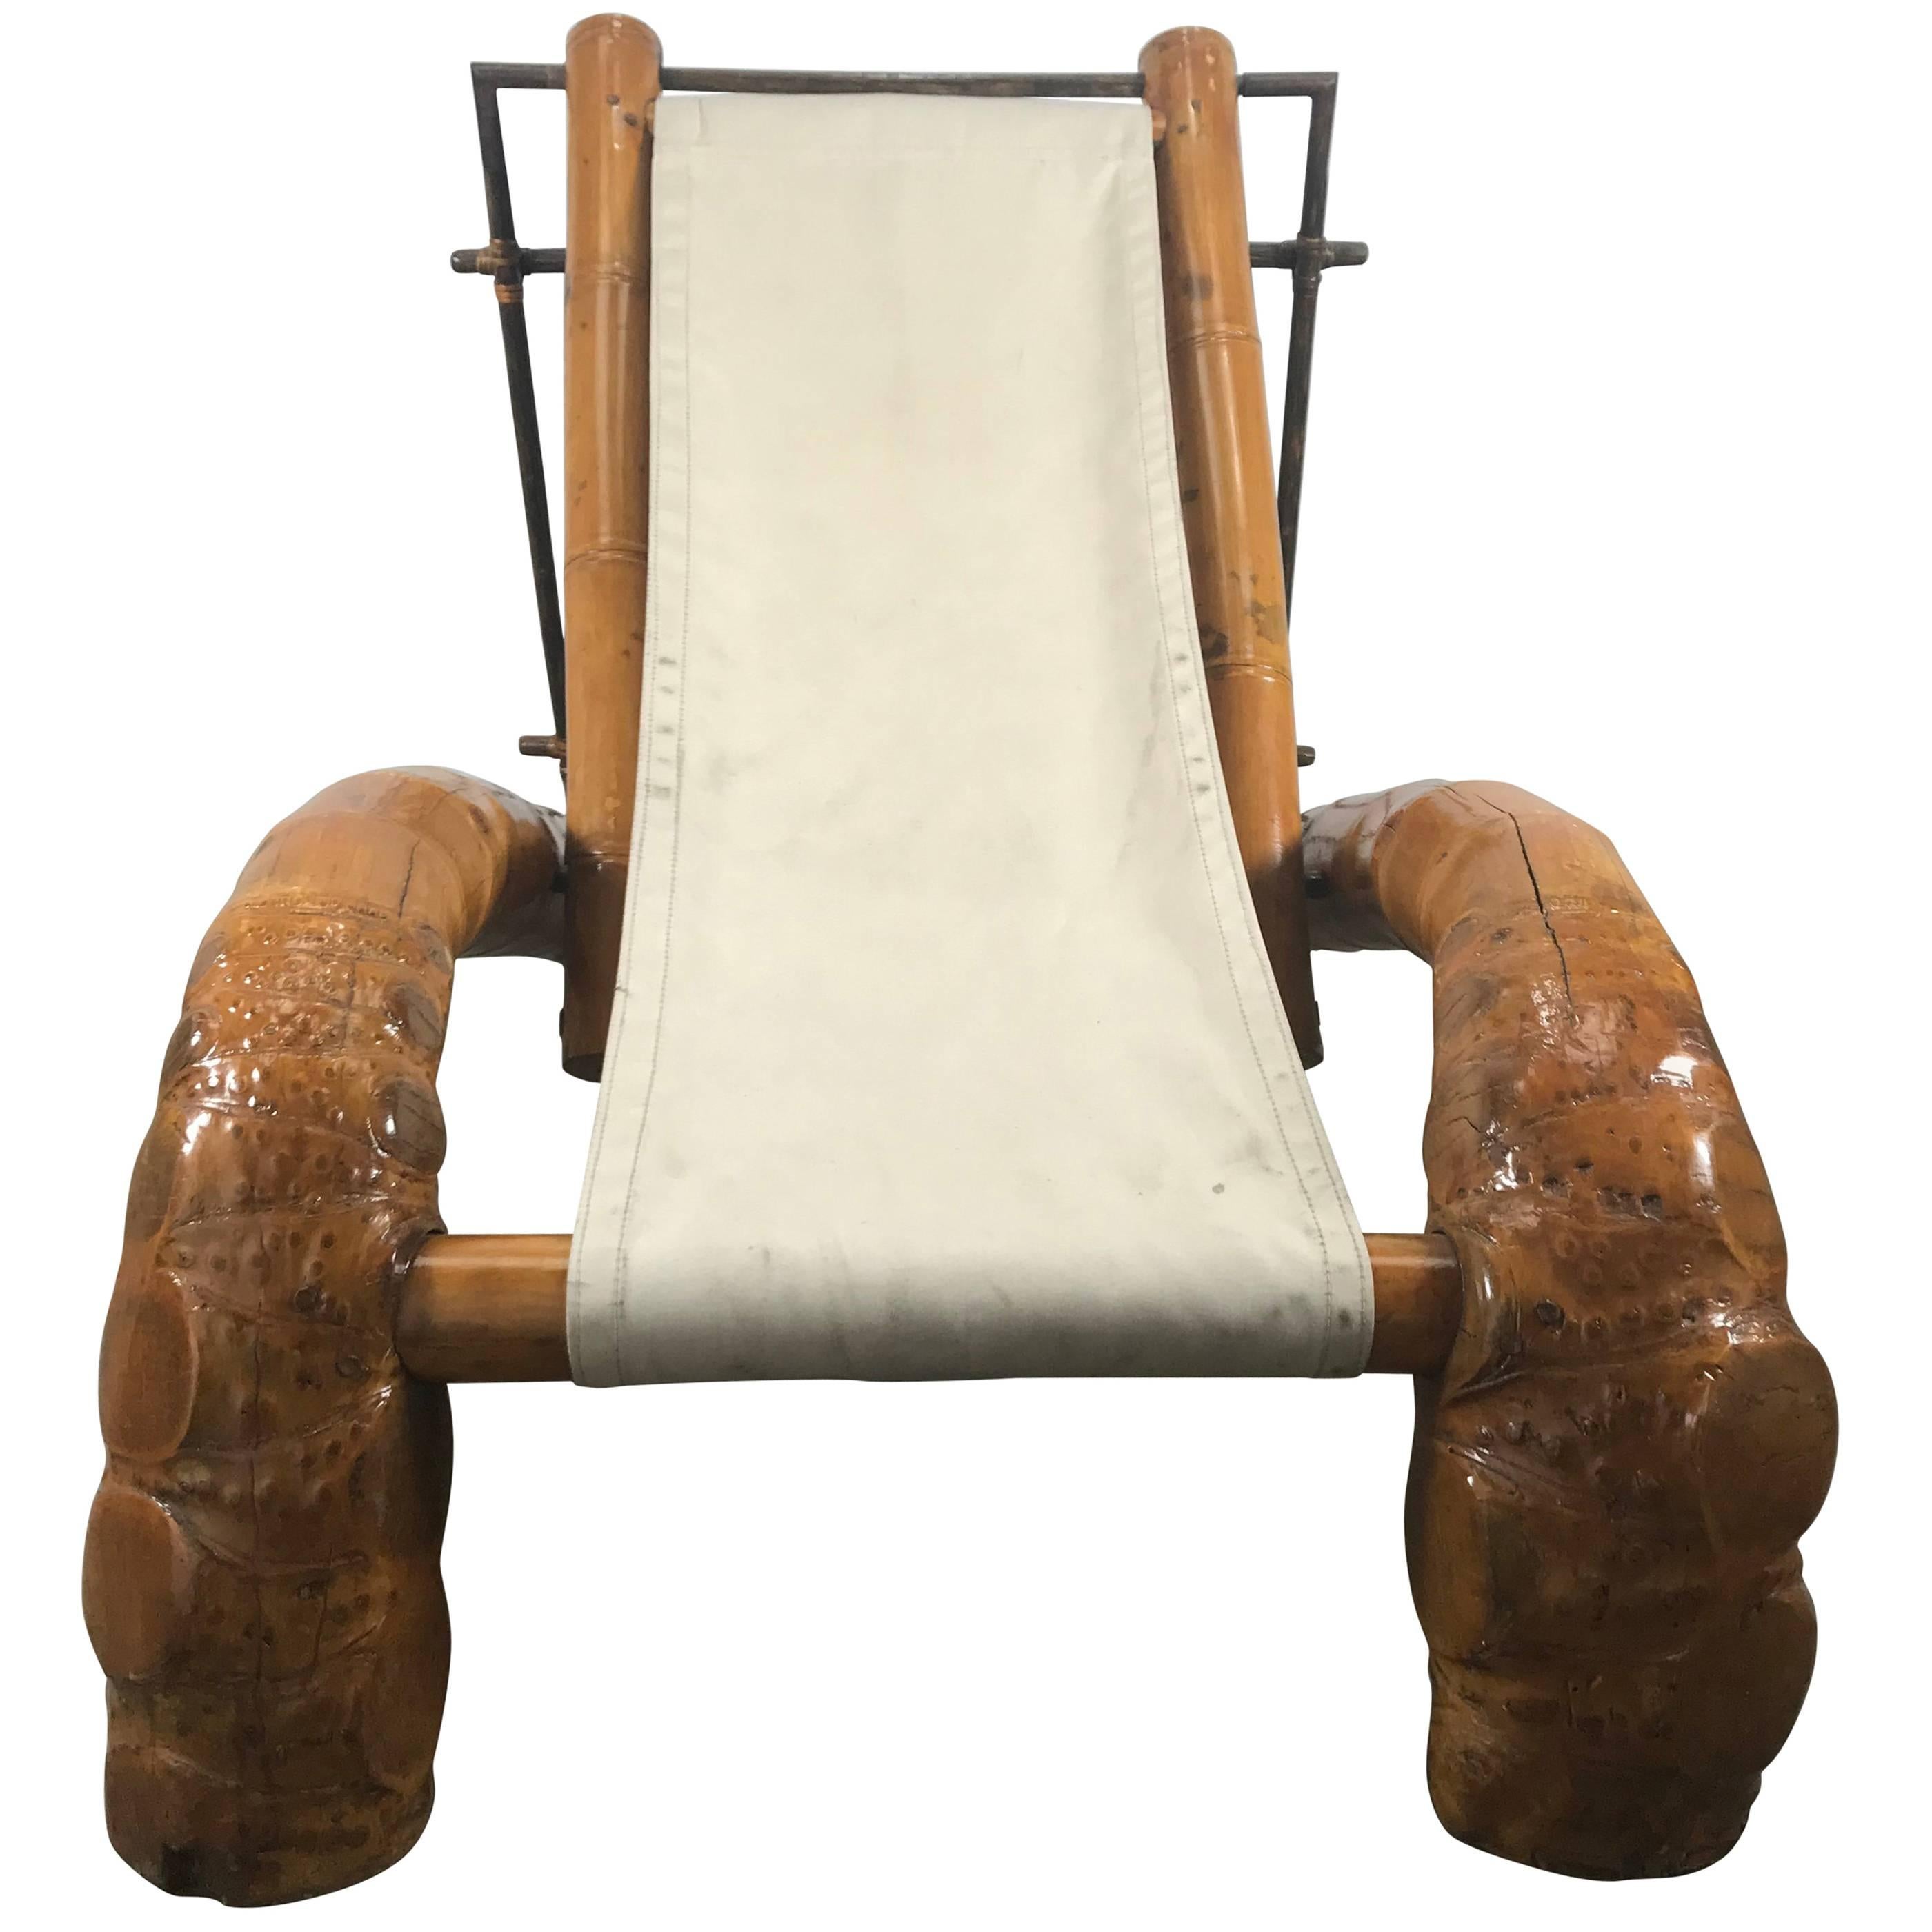 Unusual Massive Bamboo Root Chaise Sling Lounge Chair, Modernist